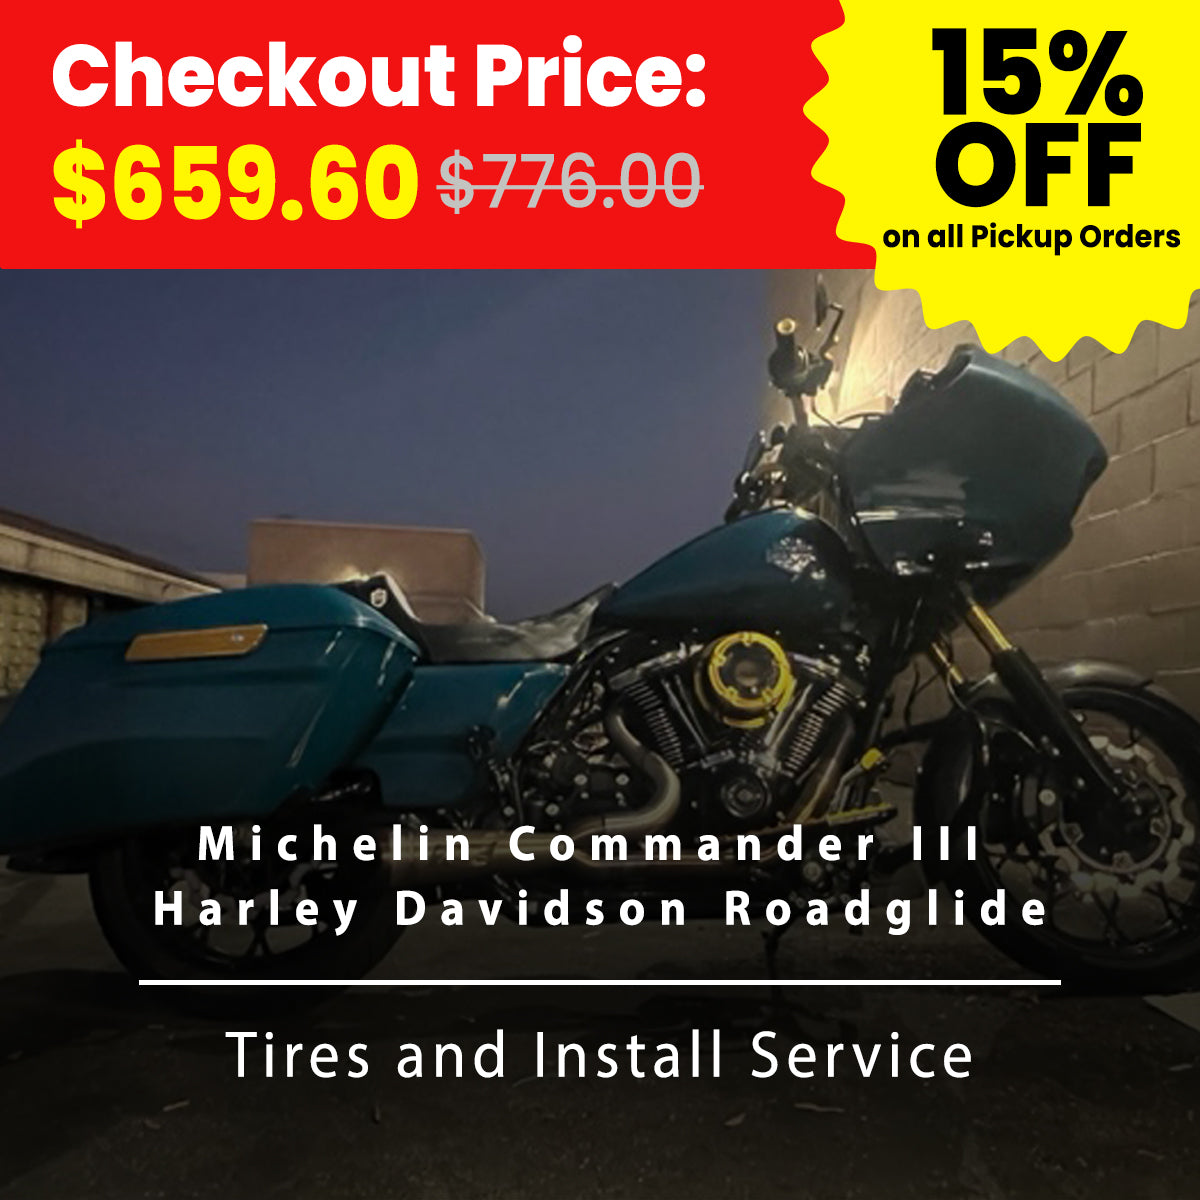 Michelin Commander III Harley Davidson Roadglide Tires and Install Service (at Location: Fullerton CA)